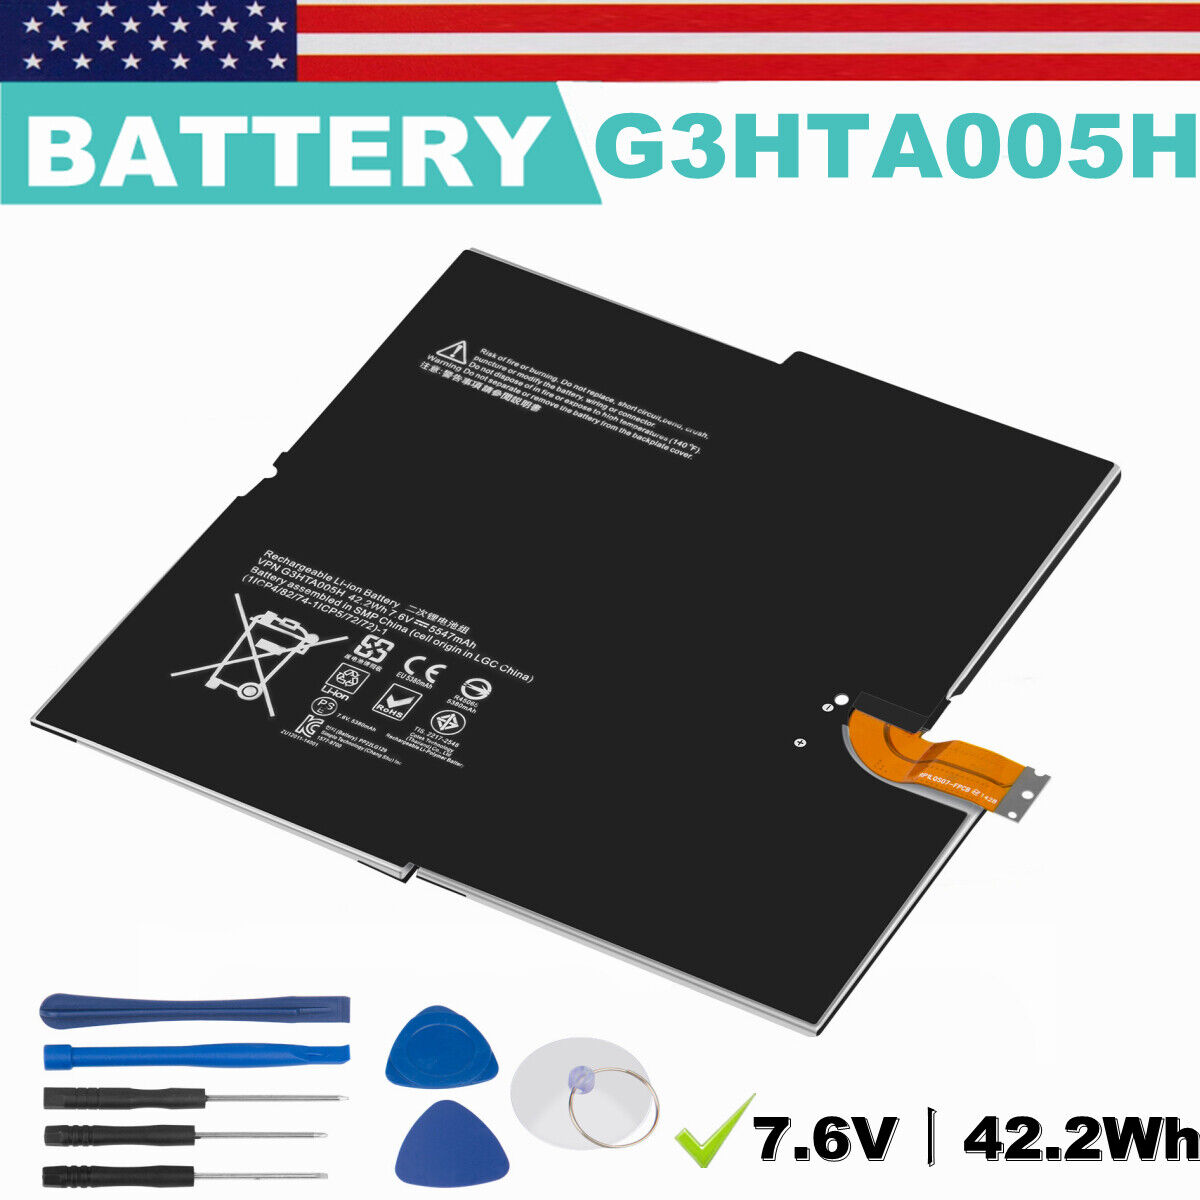 Great Choice Products Battery G3Hta005H G3Hta009H For Microsoft Surface Pro3 Pro 3 Model 1631 42.2Wh